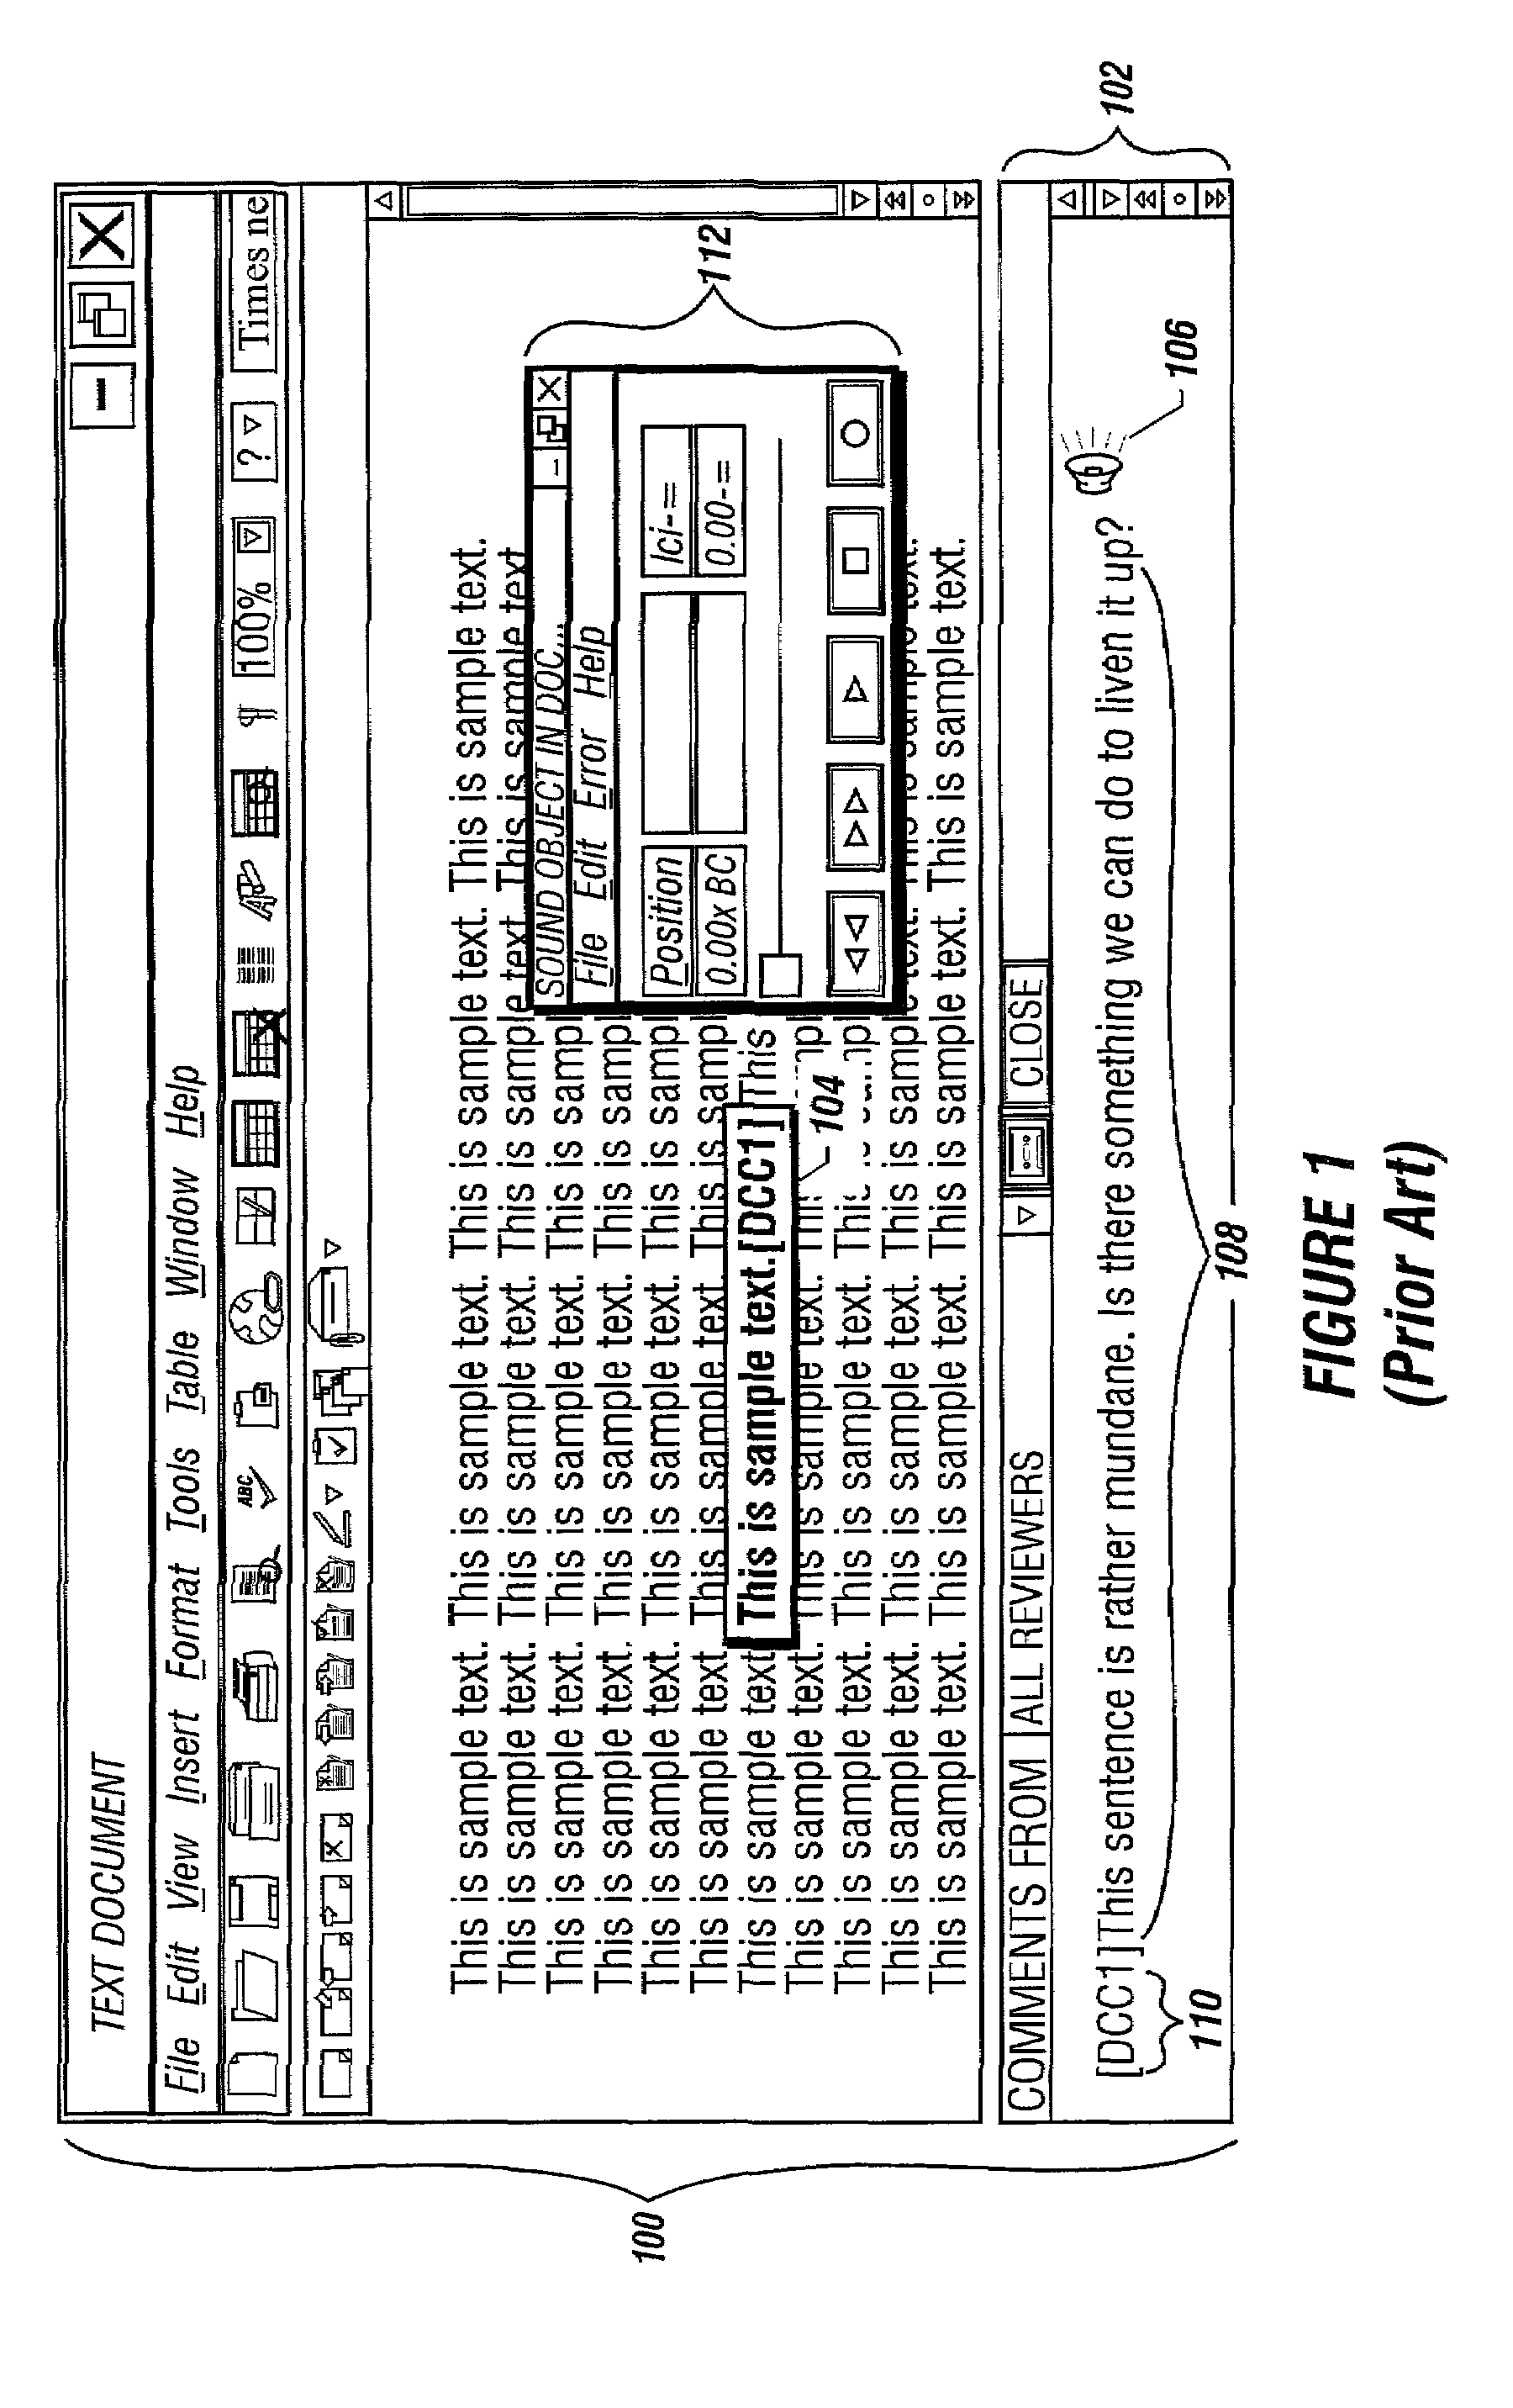 Method and apparatus for annotating a document